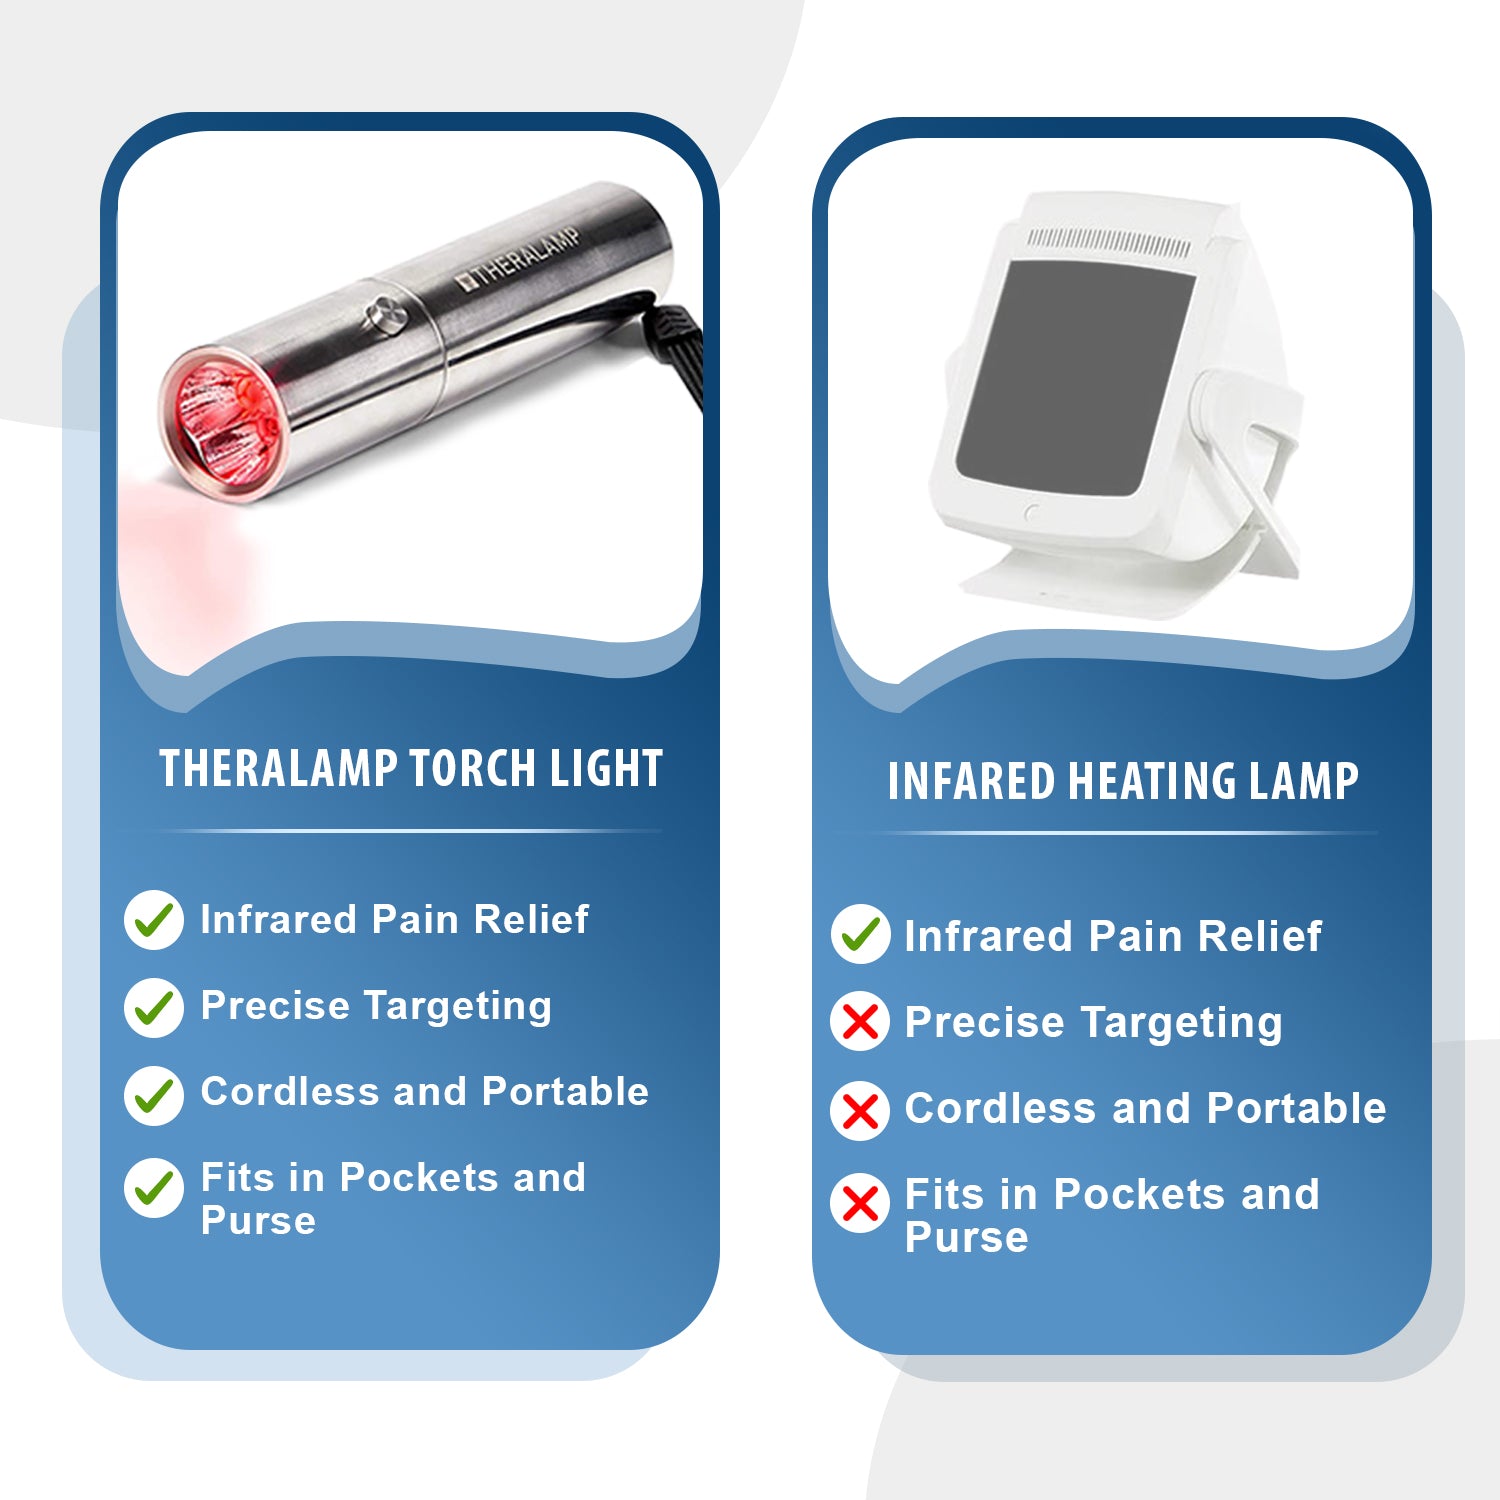 Red Light Torch by Theralamp - Handheld Medical Grade Infrared LED Light - Targeted Joint and Muscle Pain Relief - 630nm, 660nm, 850nm Wavelengths - 3000mw Rechargeable